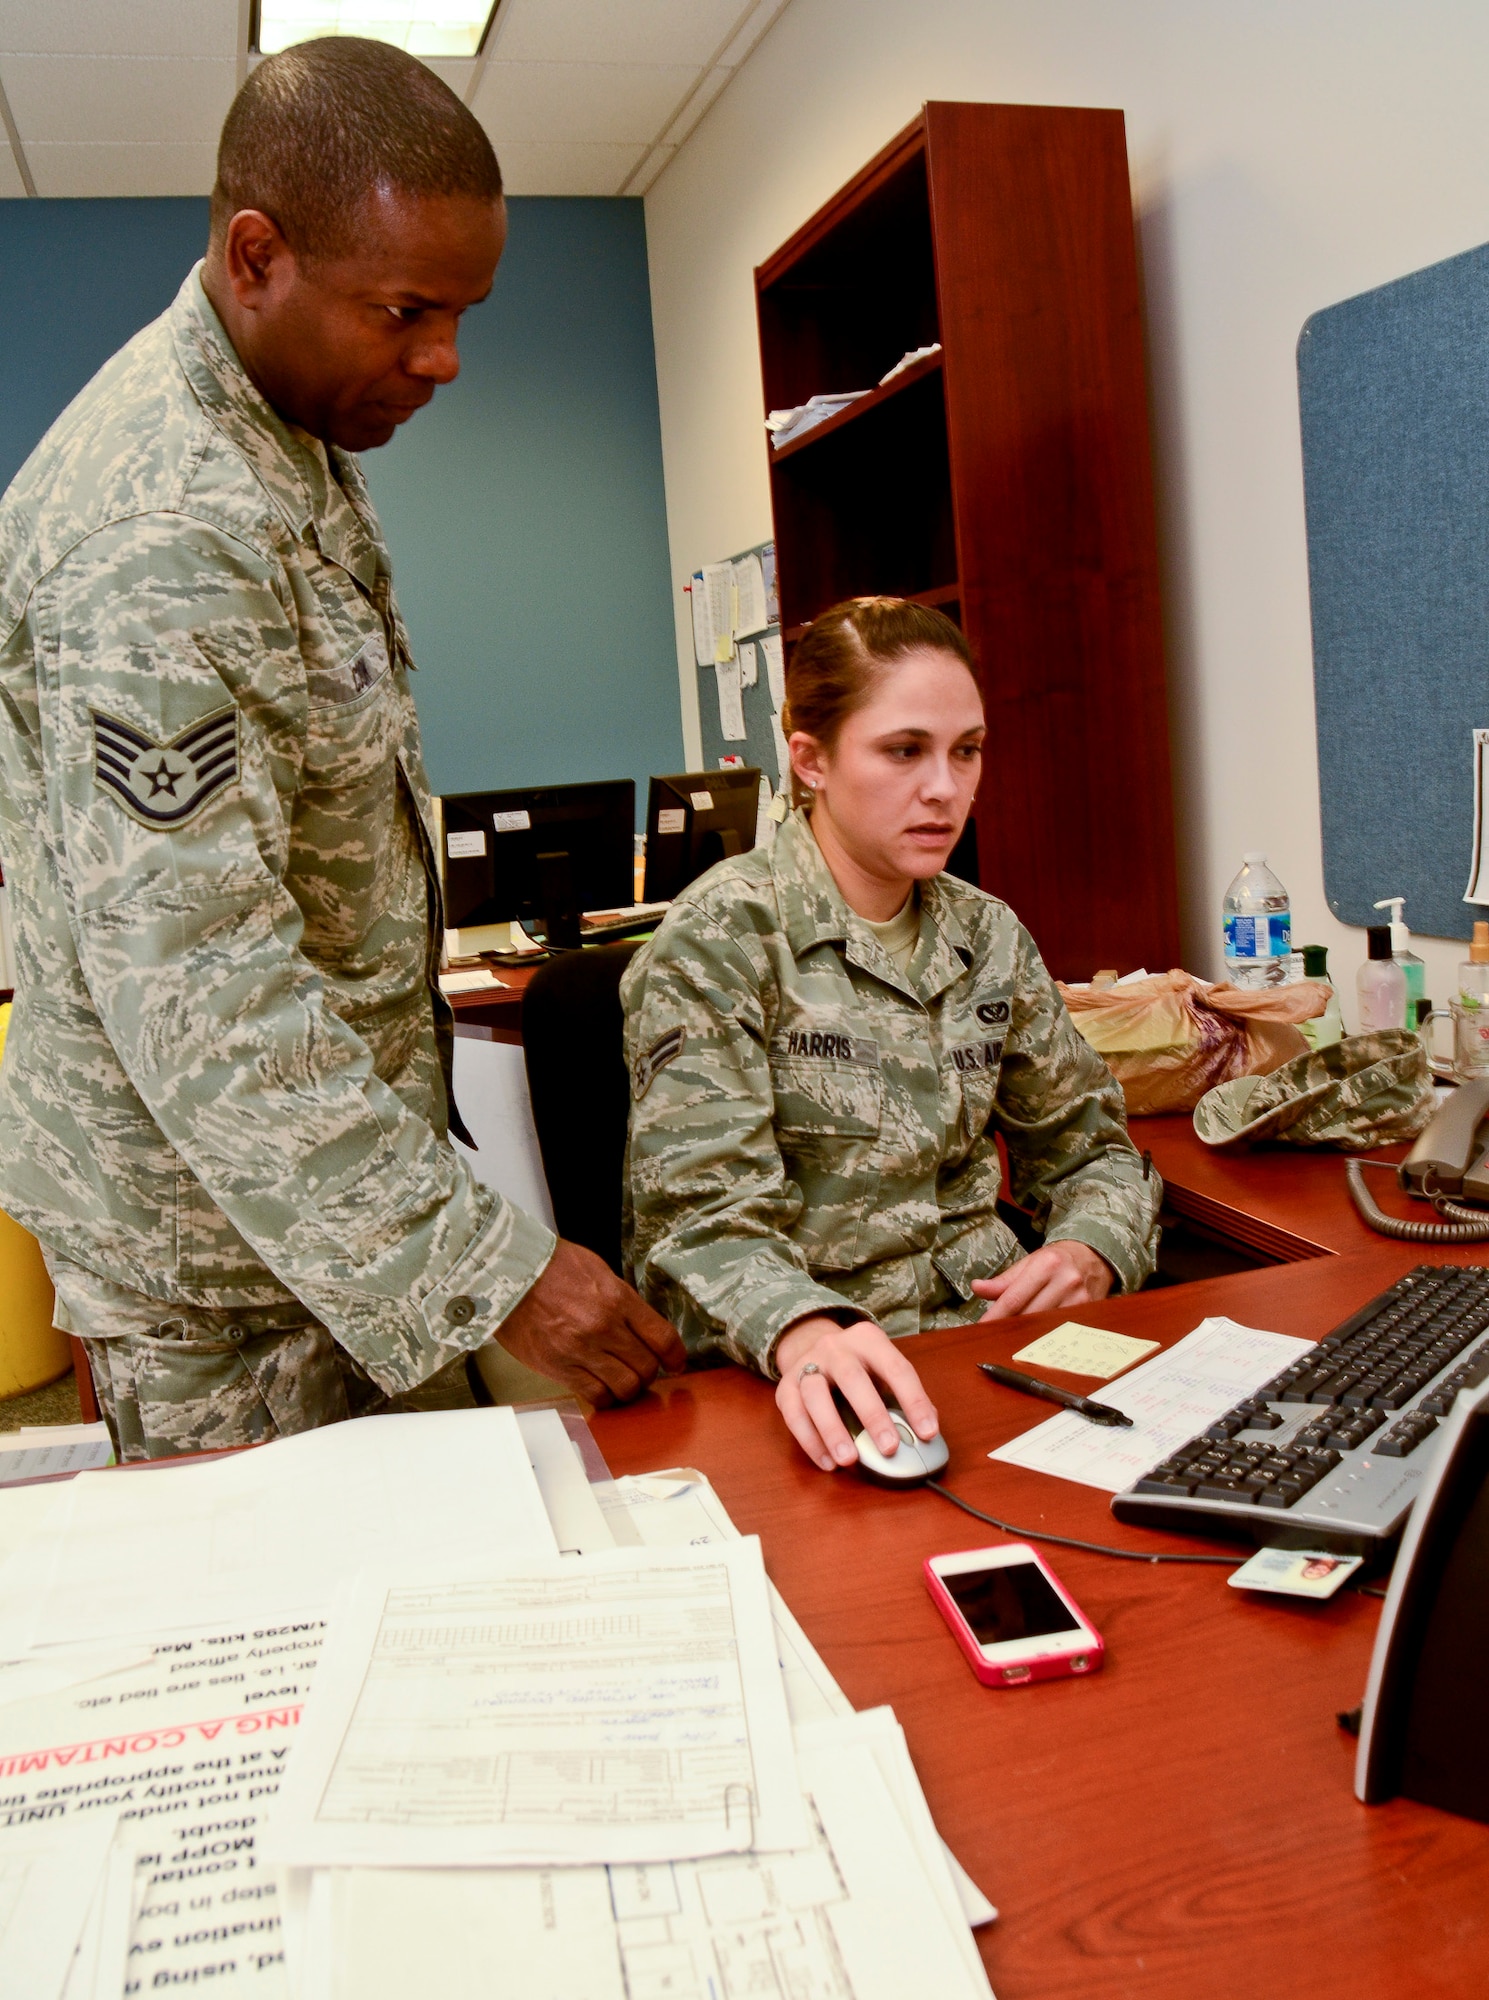 Air National Guard Staff Sgt. Columbus Cook, left, 116th Civil Engineering Squadron, reviews an AutoCAD drawing with Airman 1st Class Jennifer Harris, 202nd Engineering Installation Squadron, Robins Air Force Base, Ga., July 10, 2012.  Cook and Harris worked together to develop and produce a new user-friendly map system based on the Army's Military Grid Reference System.  The maps were created to help Airmen from Team Joint STARS more easily read and communicate grid coordinates during the unit's Operation Readiness Exercise.  ( National Guard photo by Master Sgt. Roger Parsons/Released)